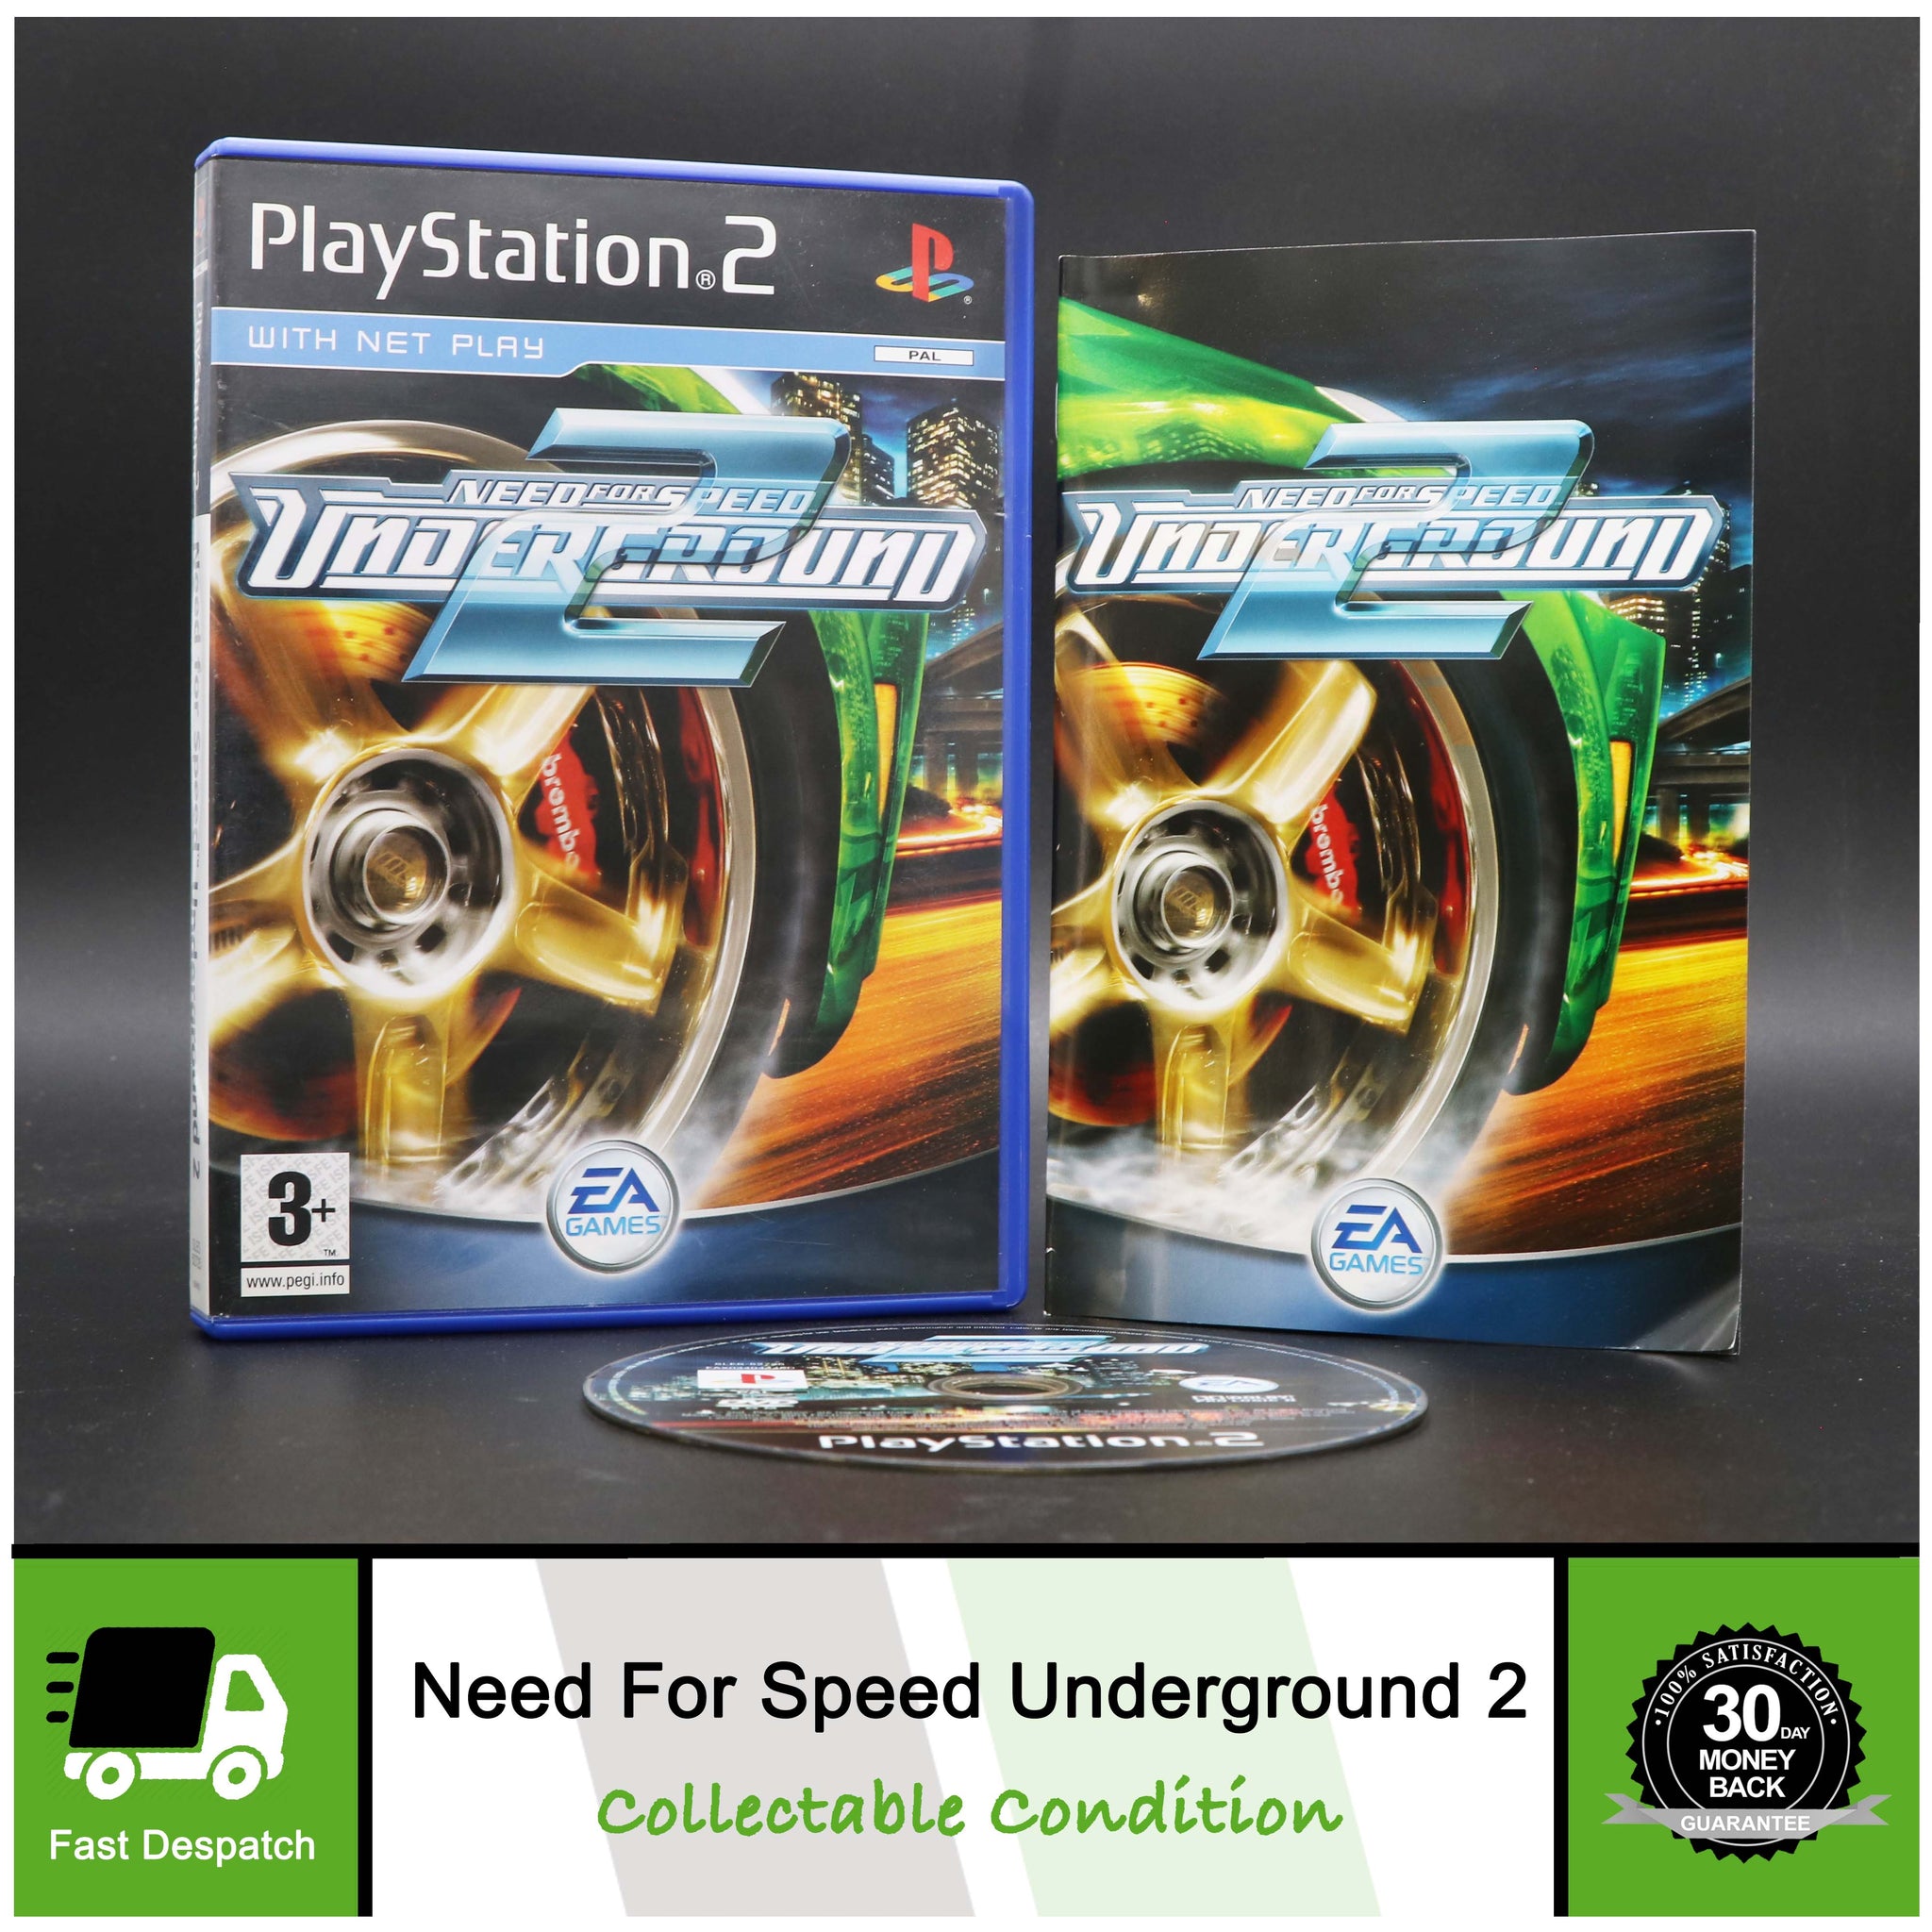 Need For Speed Underground 2 | Sony Playstation PSTWO PS2 Game | VGC!